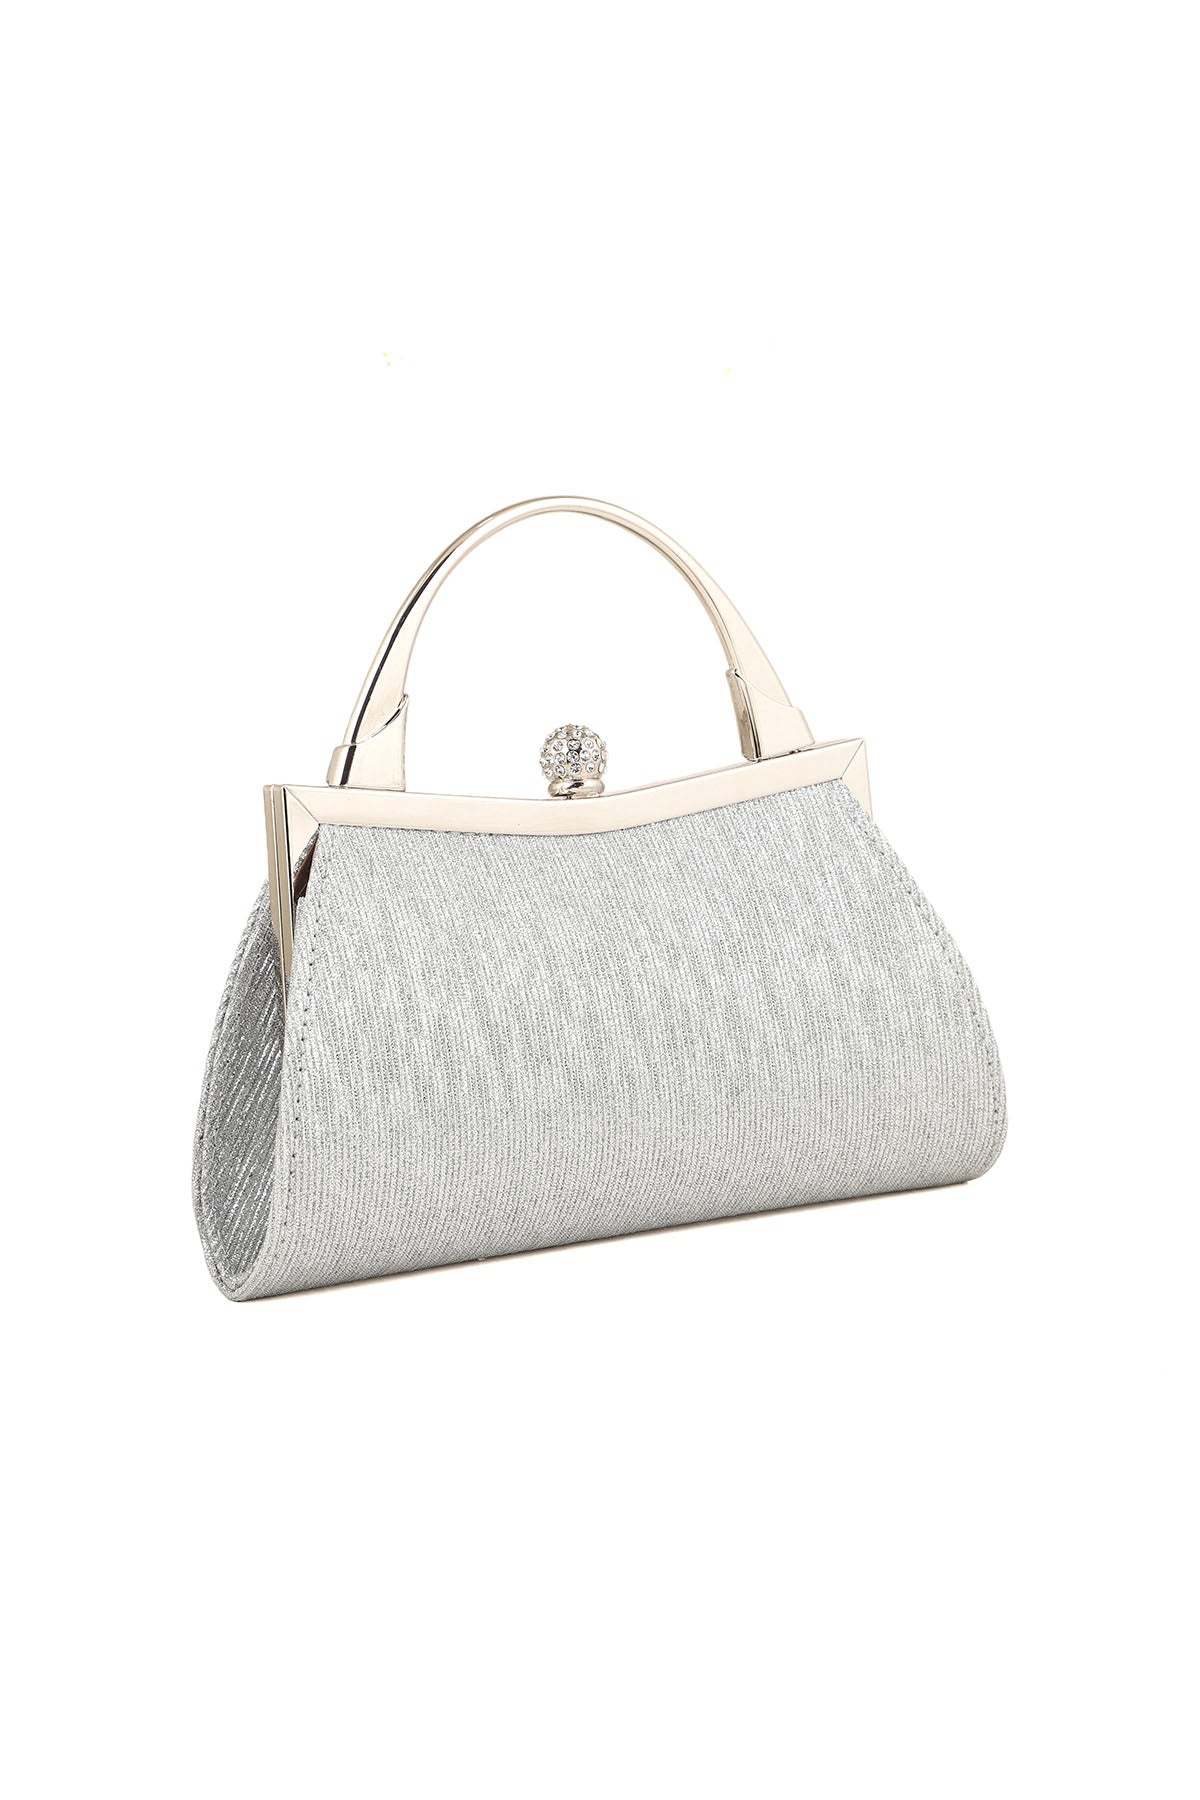 Top Handle Hand Bags B21600-Silver